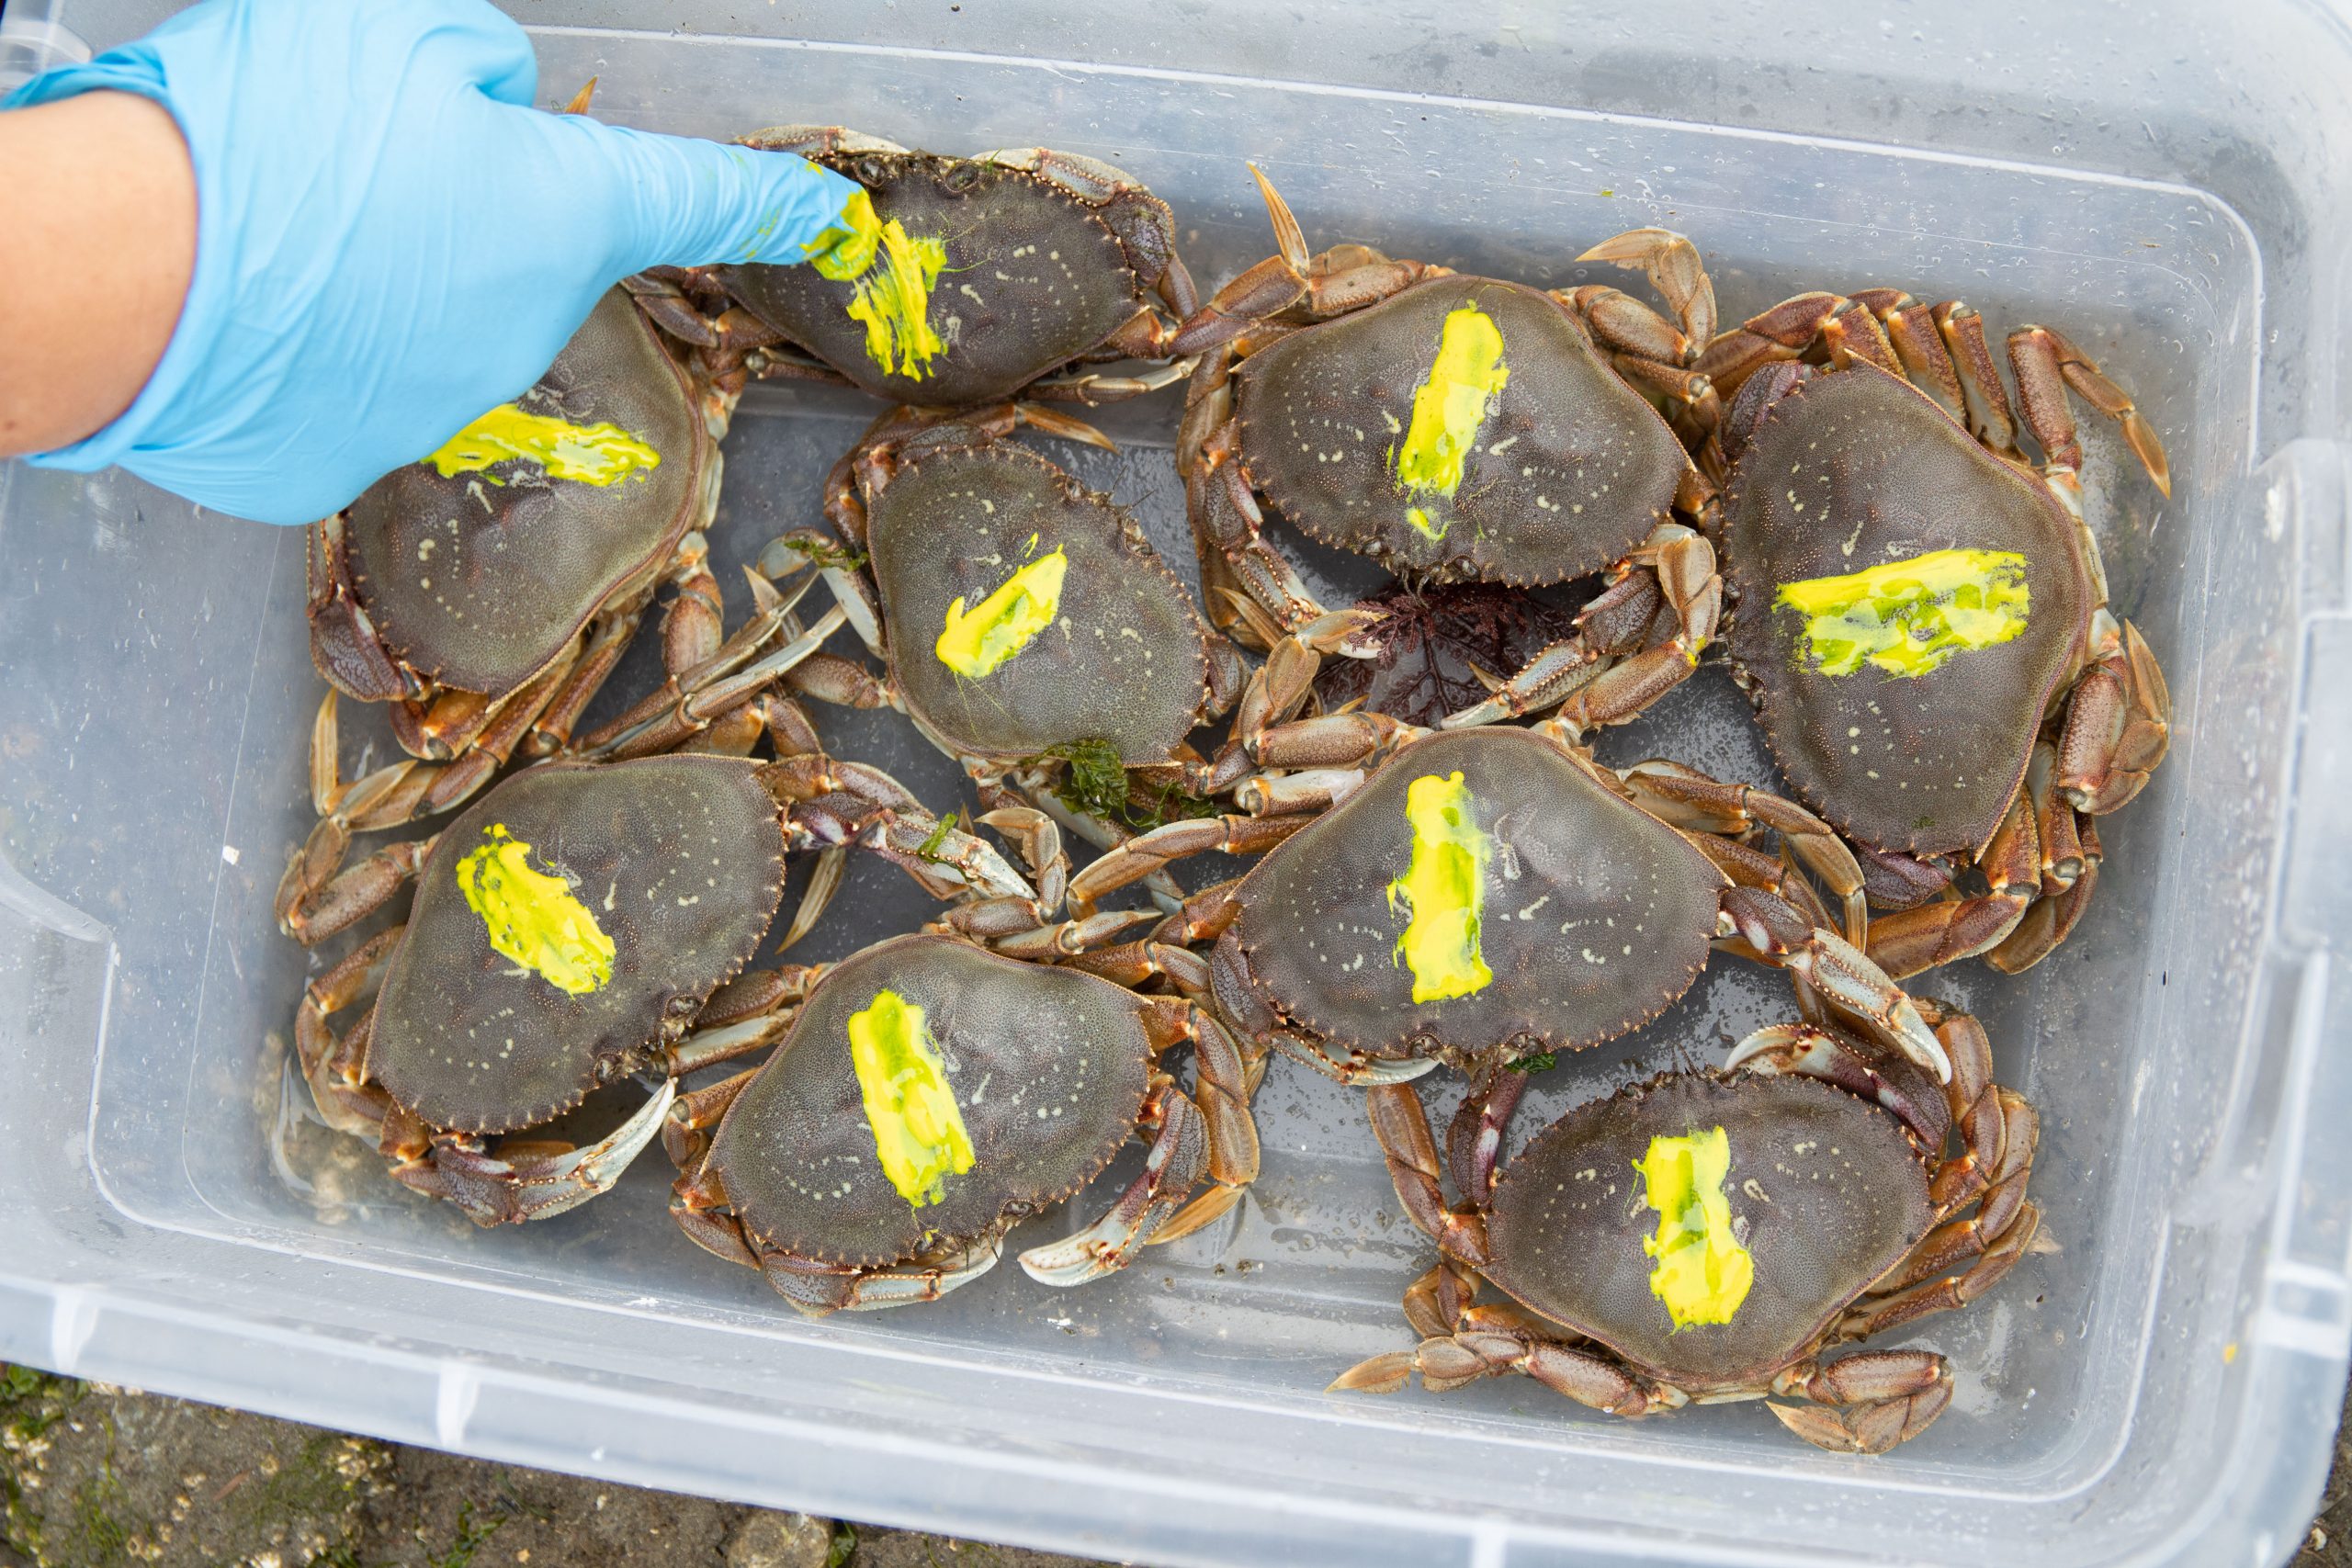 Makah Tribe Marks and Recaptures Dungeness and European Crab for Population Estimates